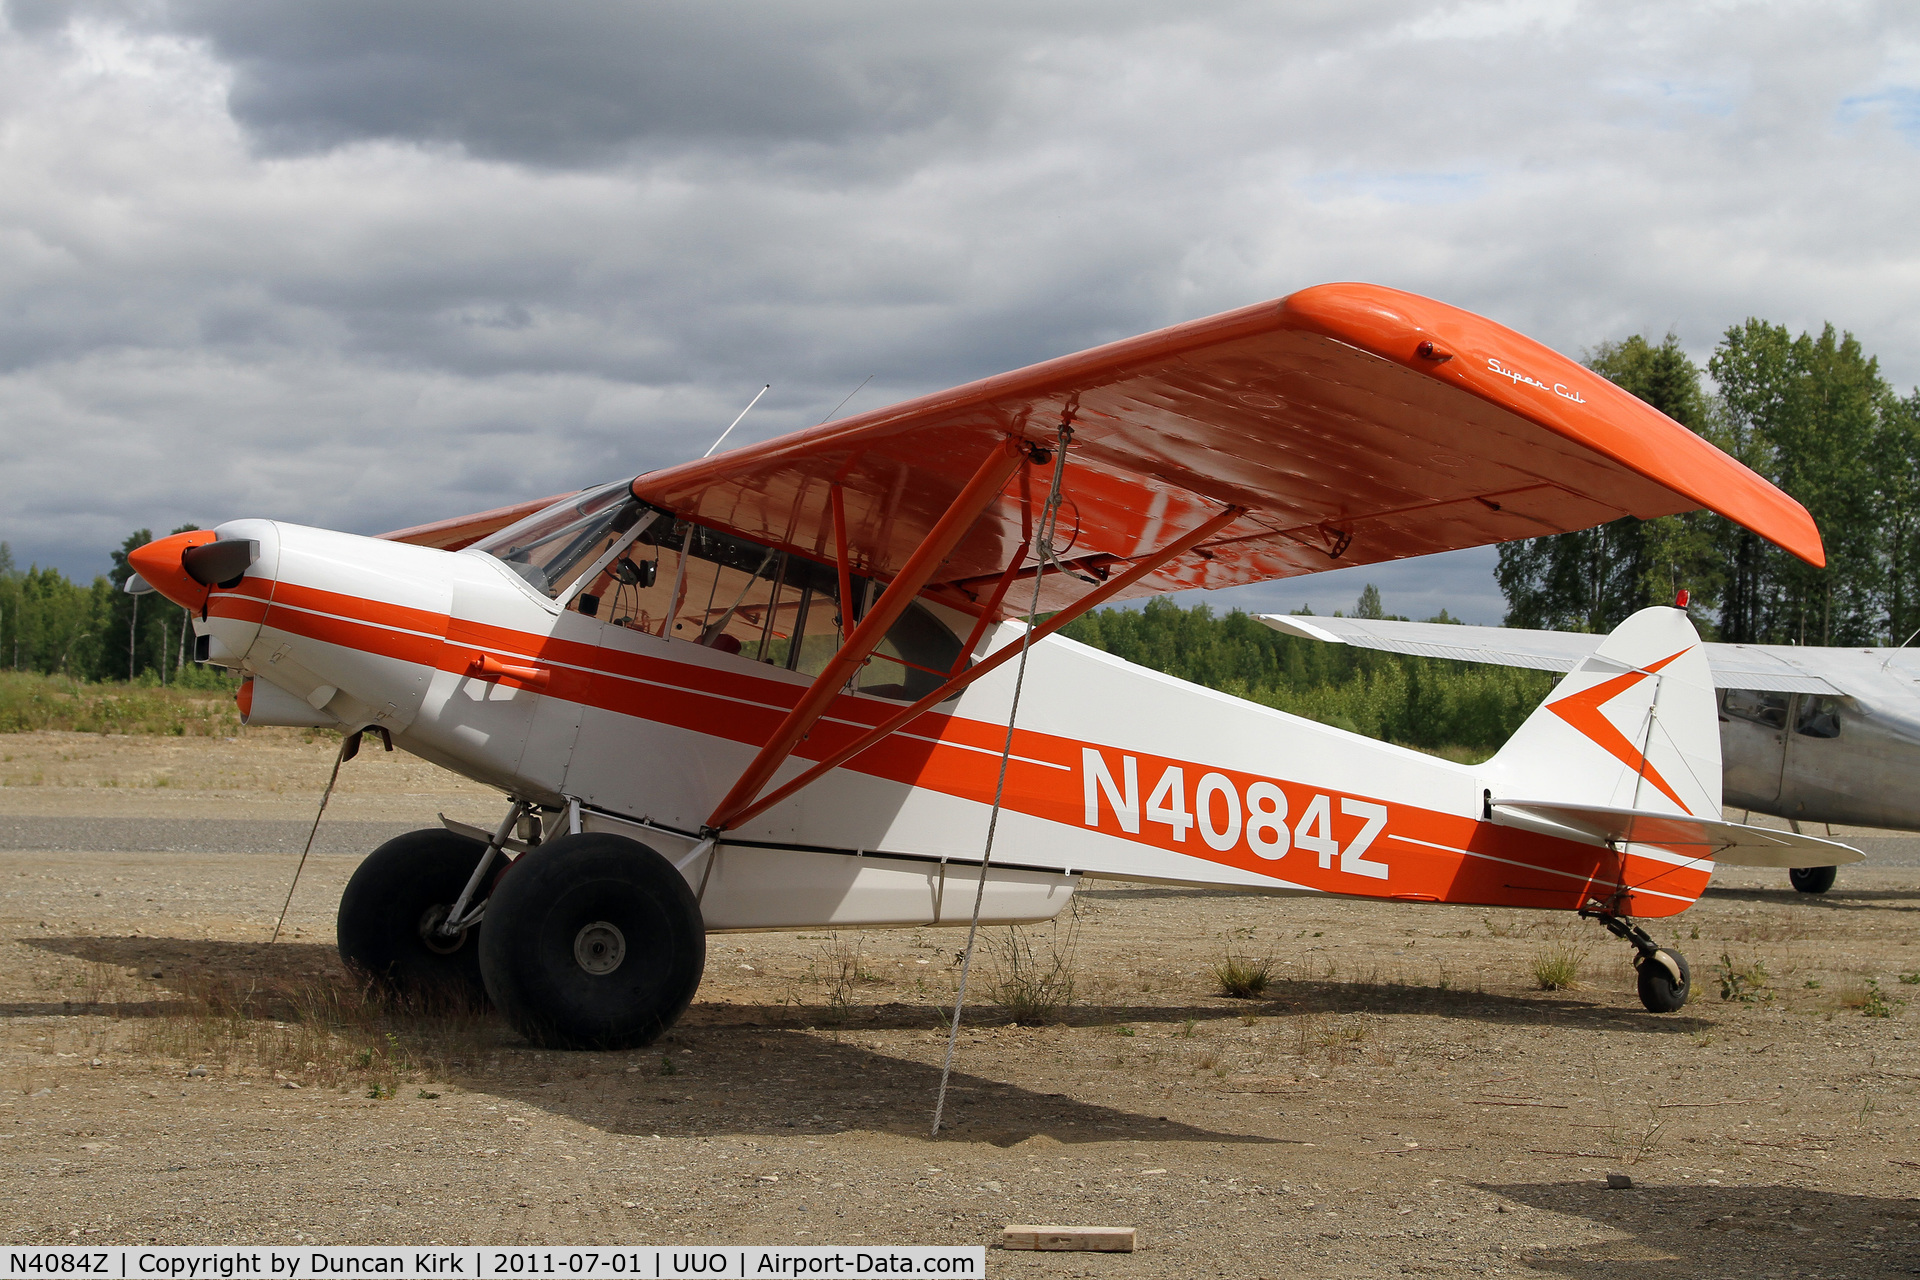 N4084Z, 1964 Piper PA-18-150 Super Cub C/N 18-8099, A little tundra action!